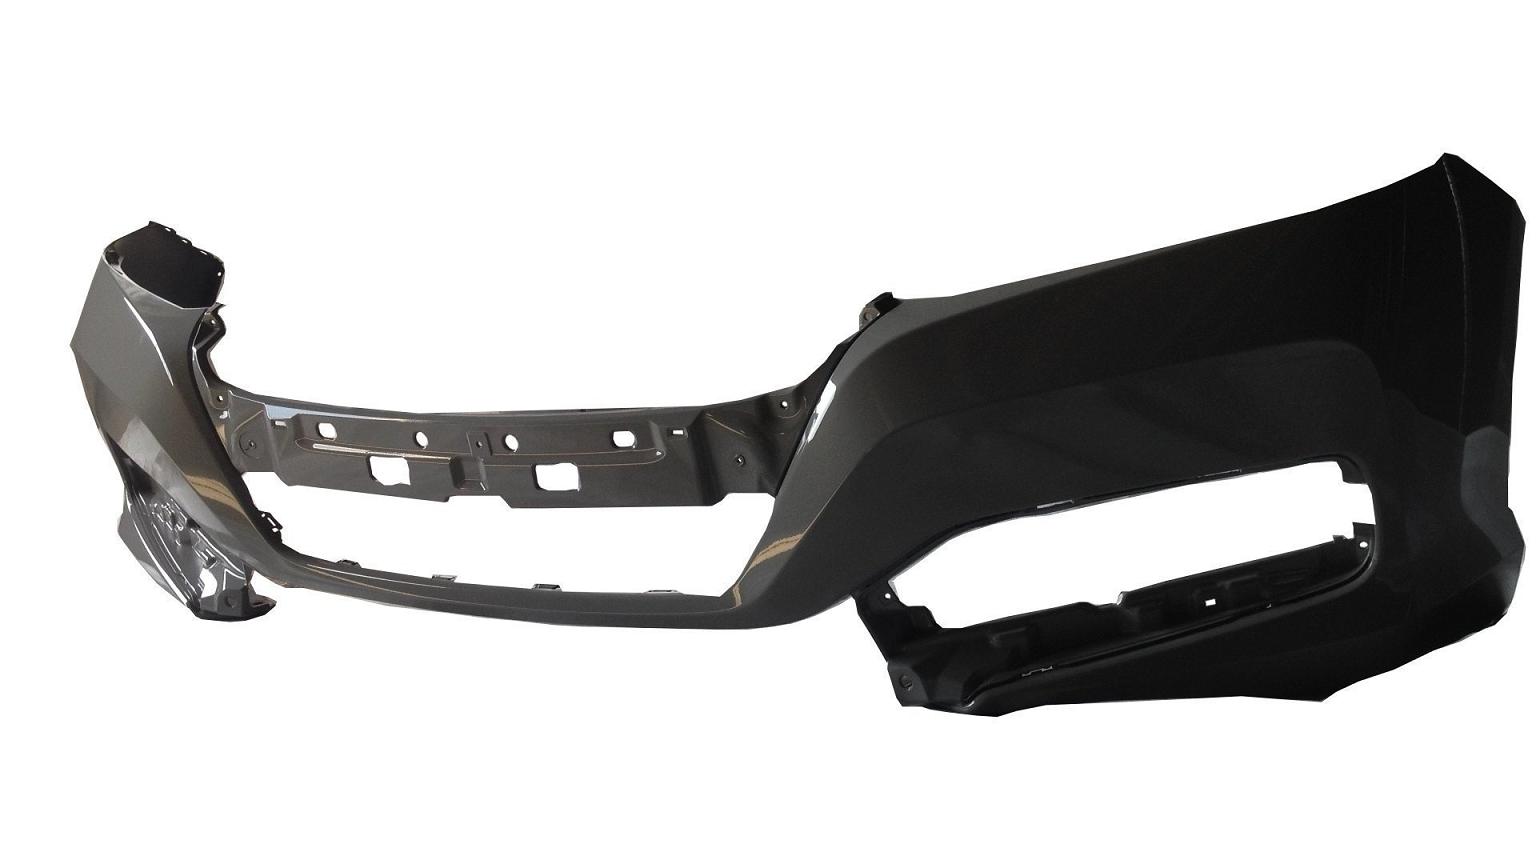 Aftermarket BUMPER COVERS for HONDA - ACCORD, ACCORD,14-14,Front bumper cover